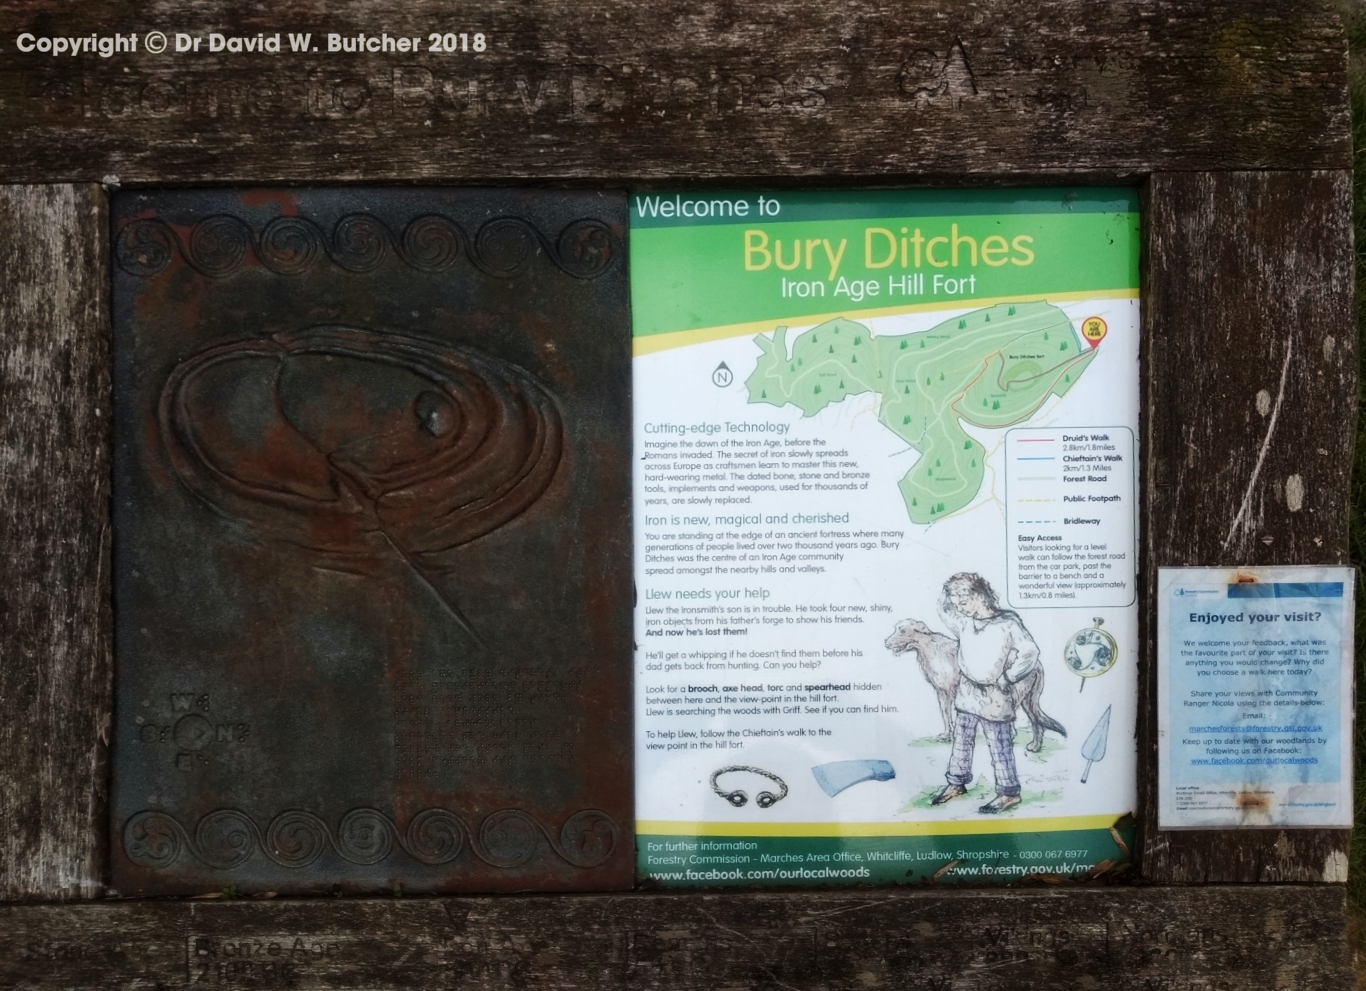 Bury Ditches Iron Age Hill Fort information board, Shropshire near Clun